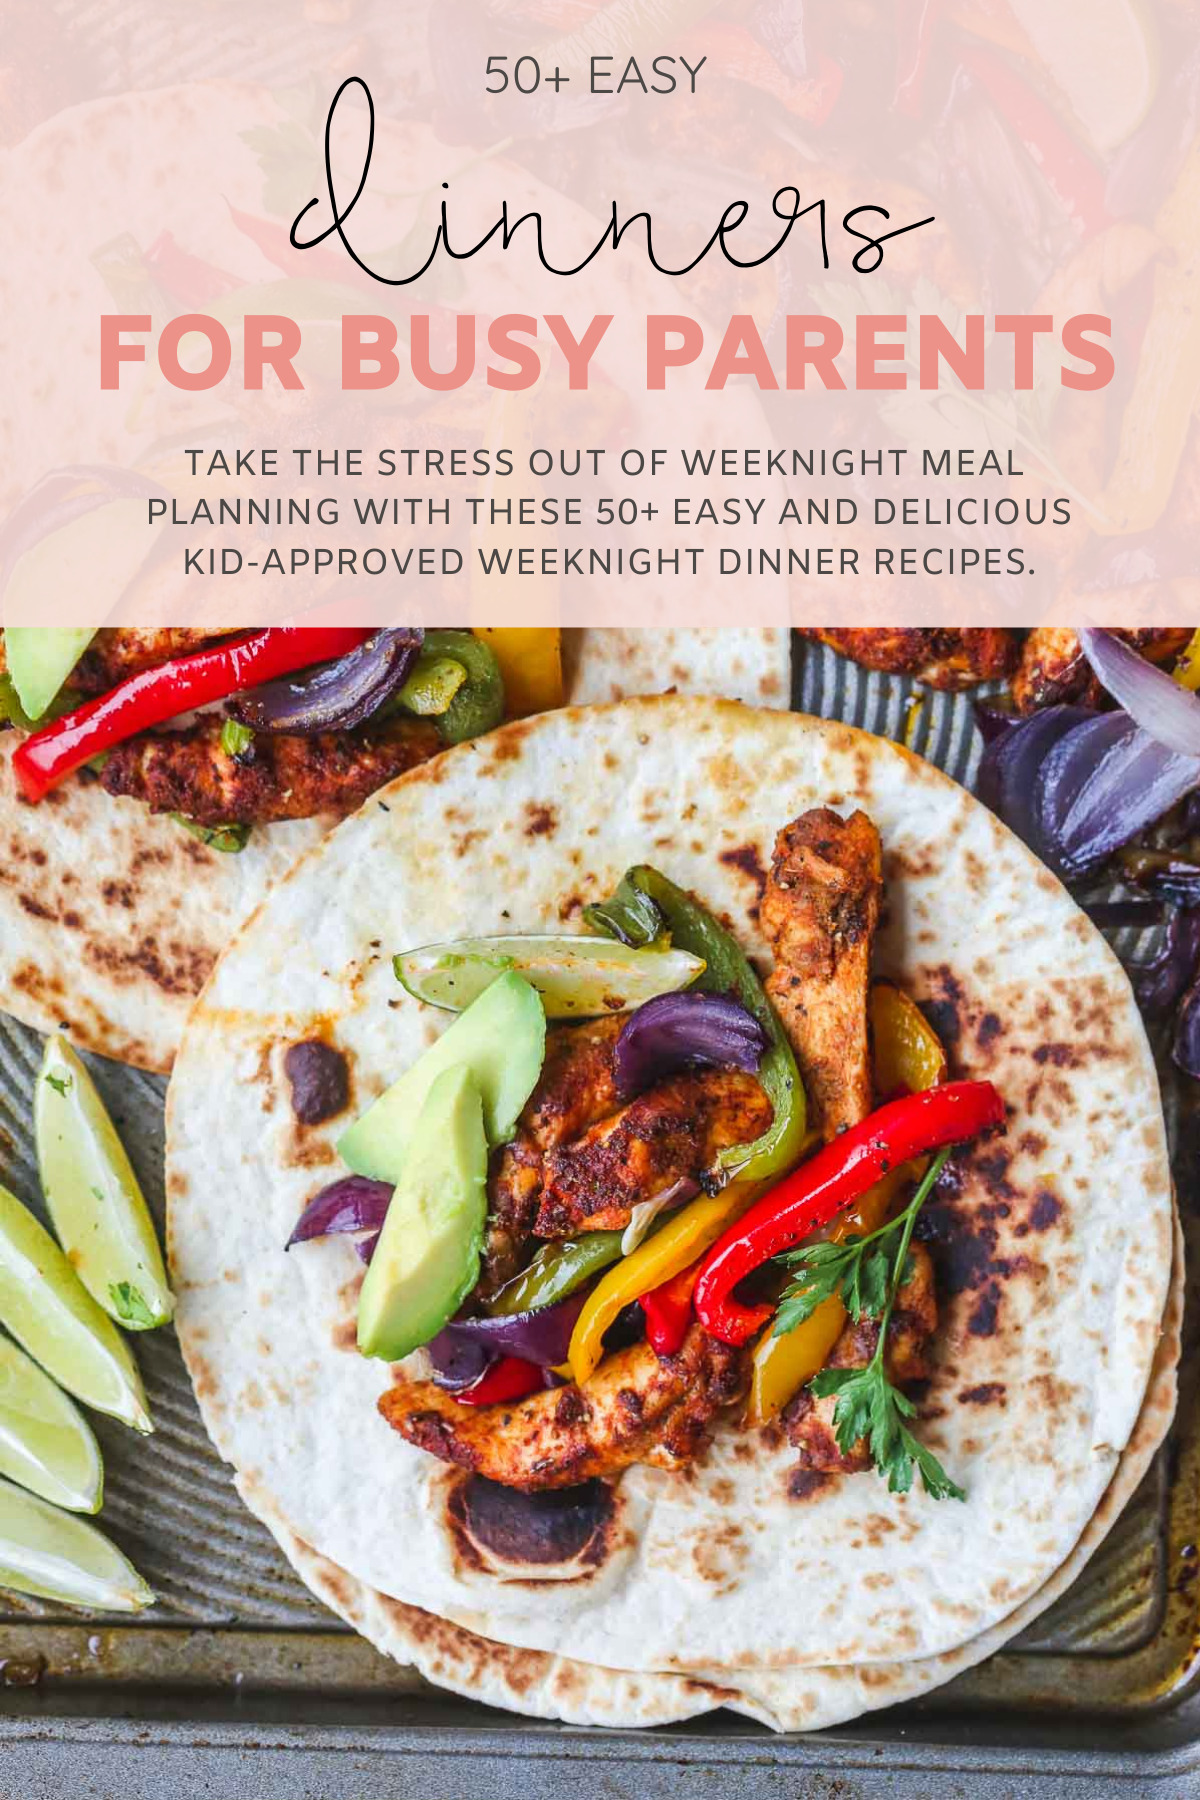 Take the stress out of weeknight meal planning with these 50+ easy and delicious weeknight dinner recipes for busy parents. We're talking sheet pan meals, dinners that can be made in a crock pot or Instant Pot, one pan dinners, skillet meals, and more; and all are family and kid-approved. | @glitterinclexi | GLITTERINC.COM